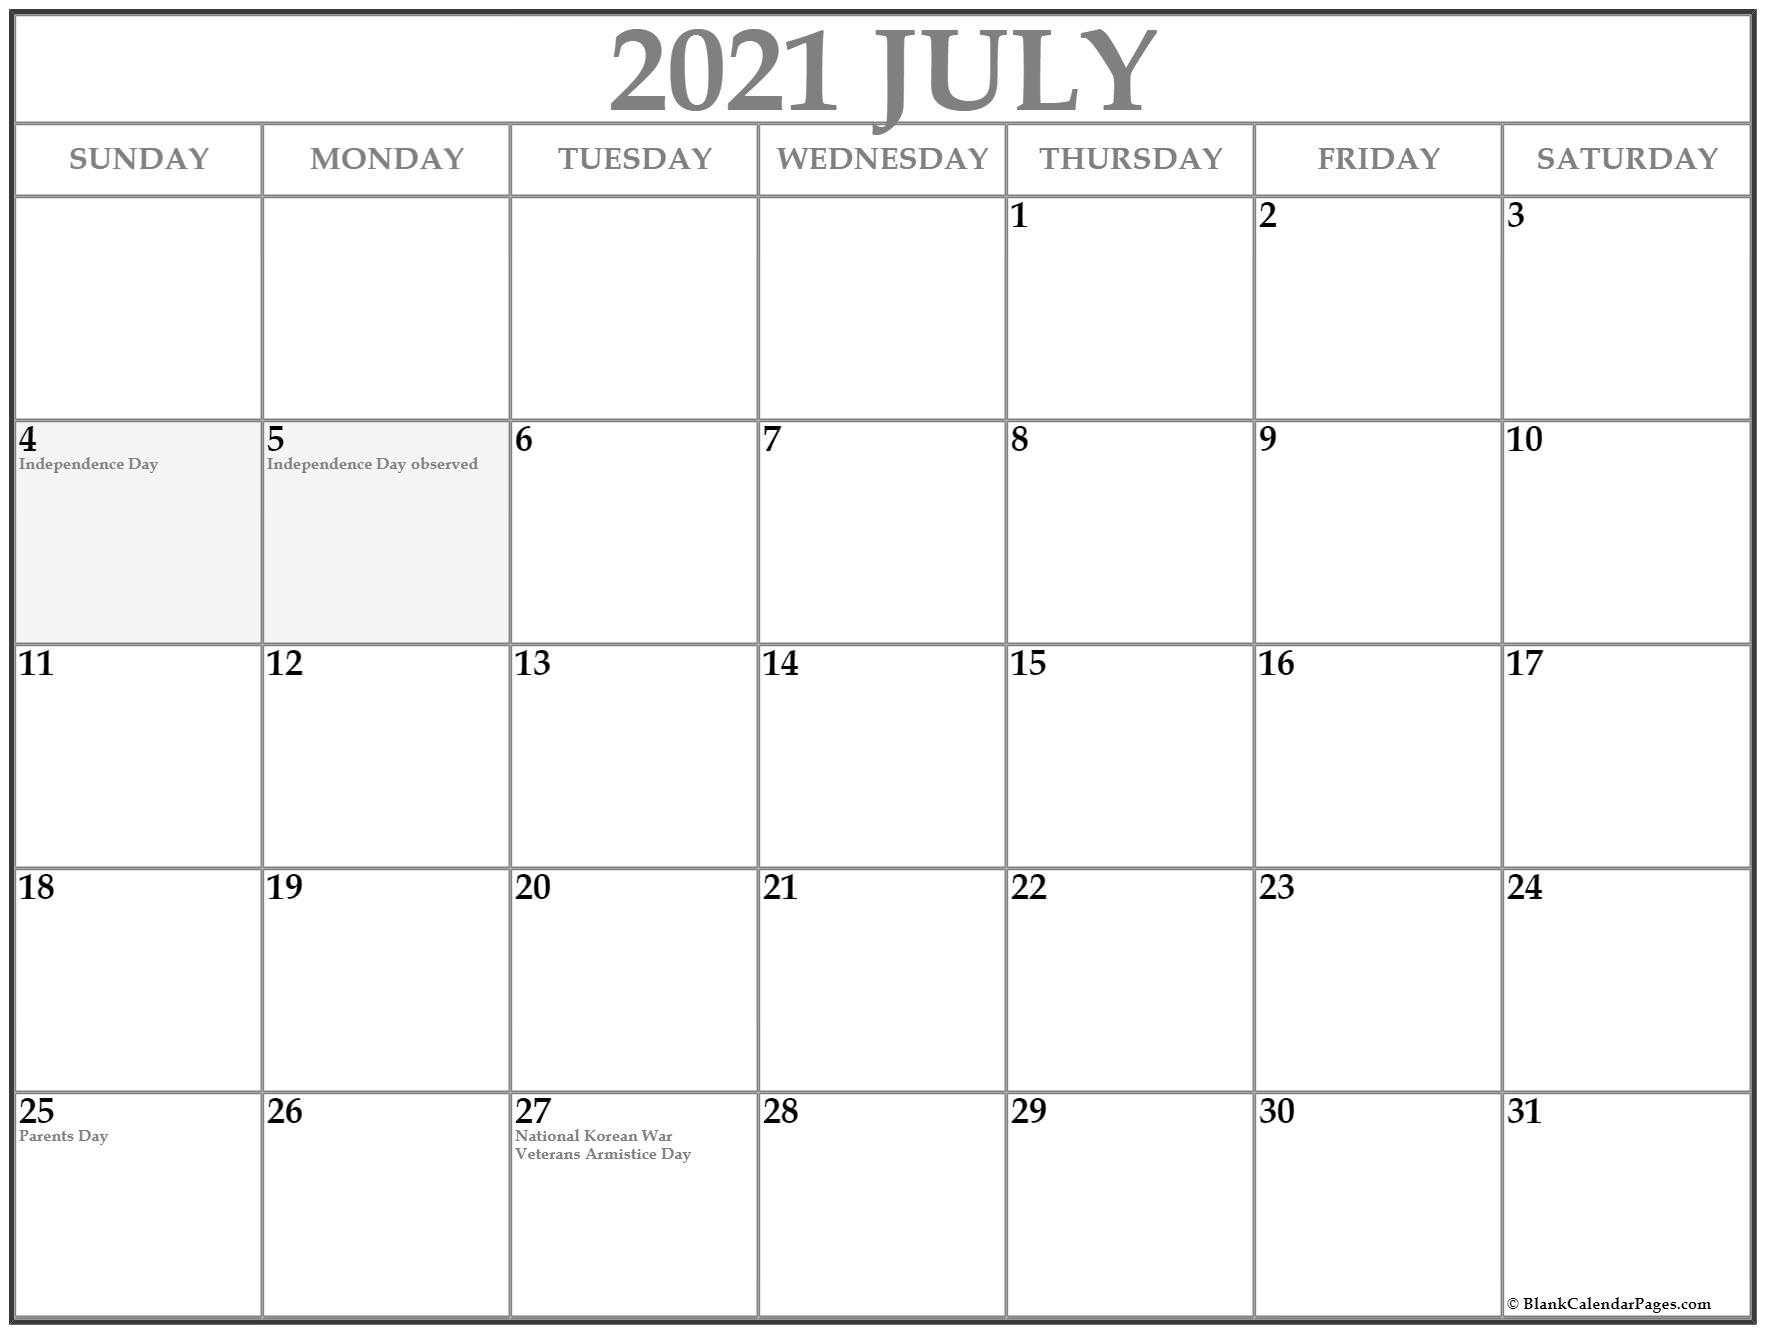 Collection Of July 2021 Calendars With Holidays July 2021 Calendar Holidays